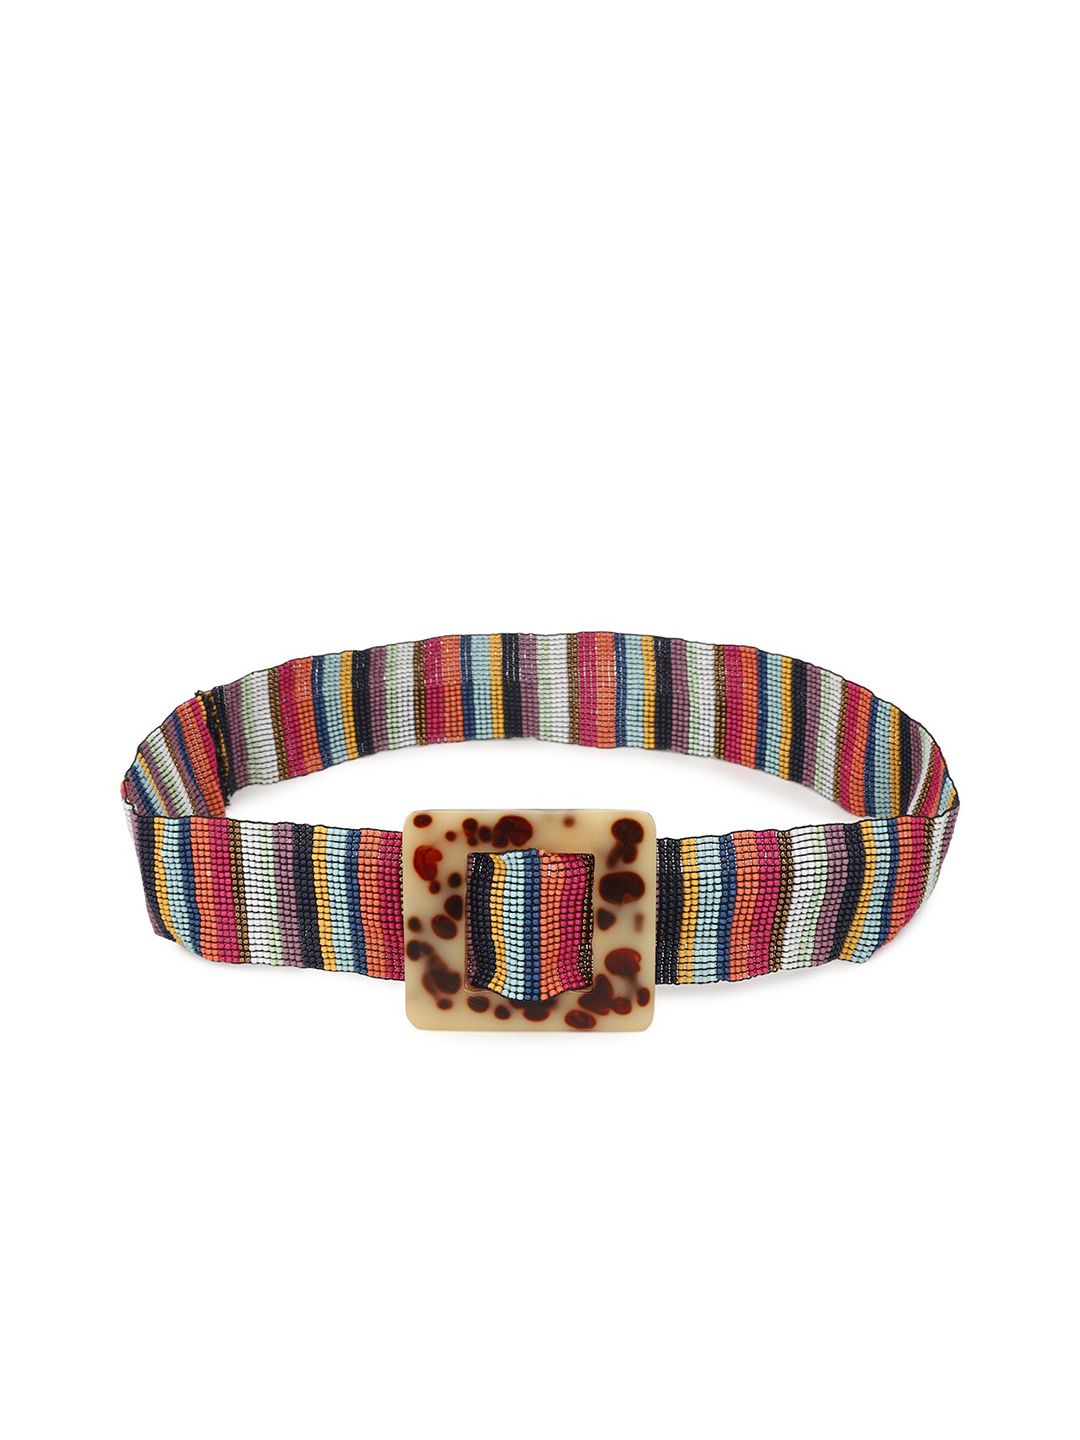 FOREVER 21 Women Blue & Pink Striped Belt Price in India